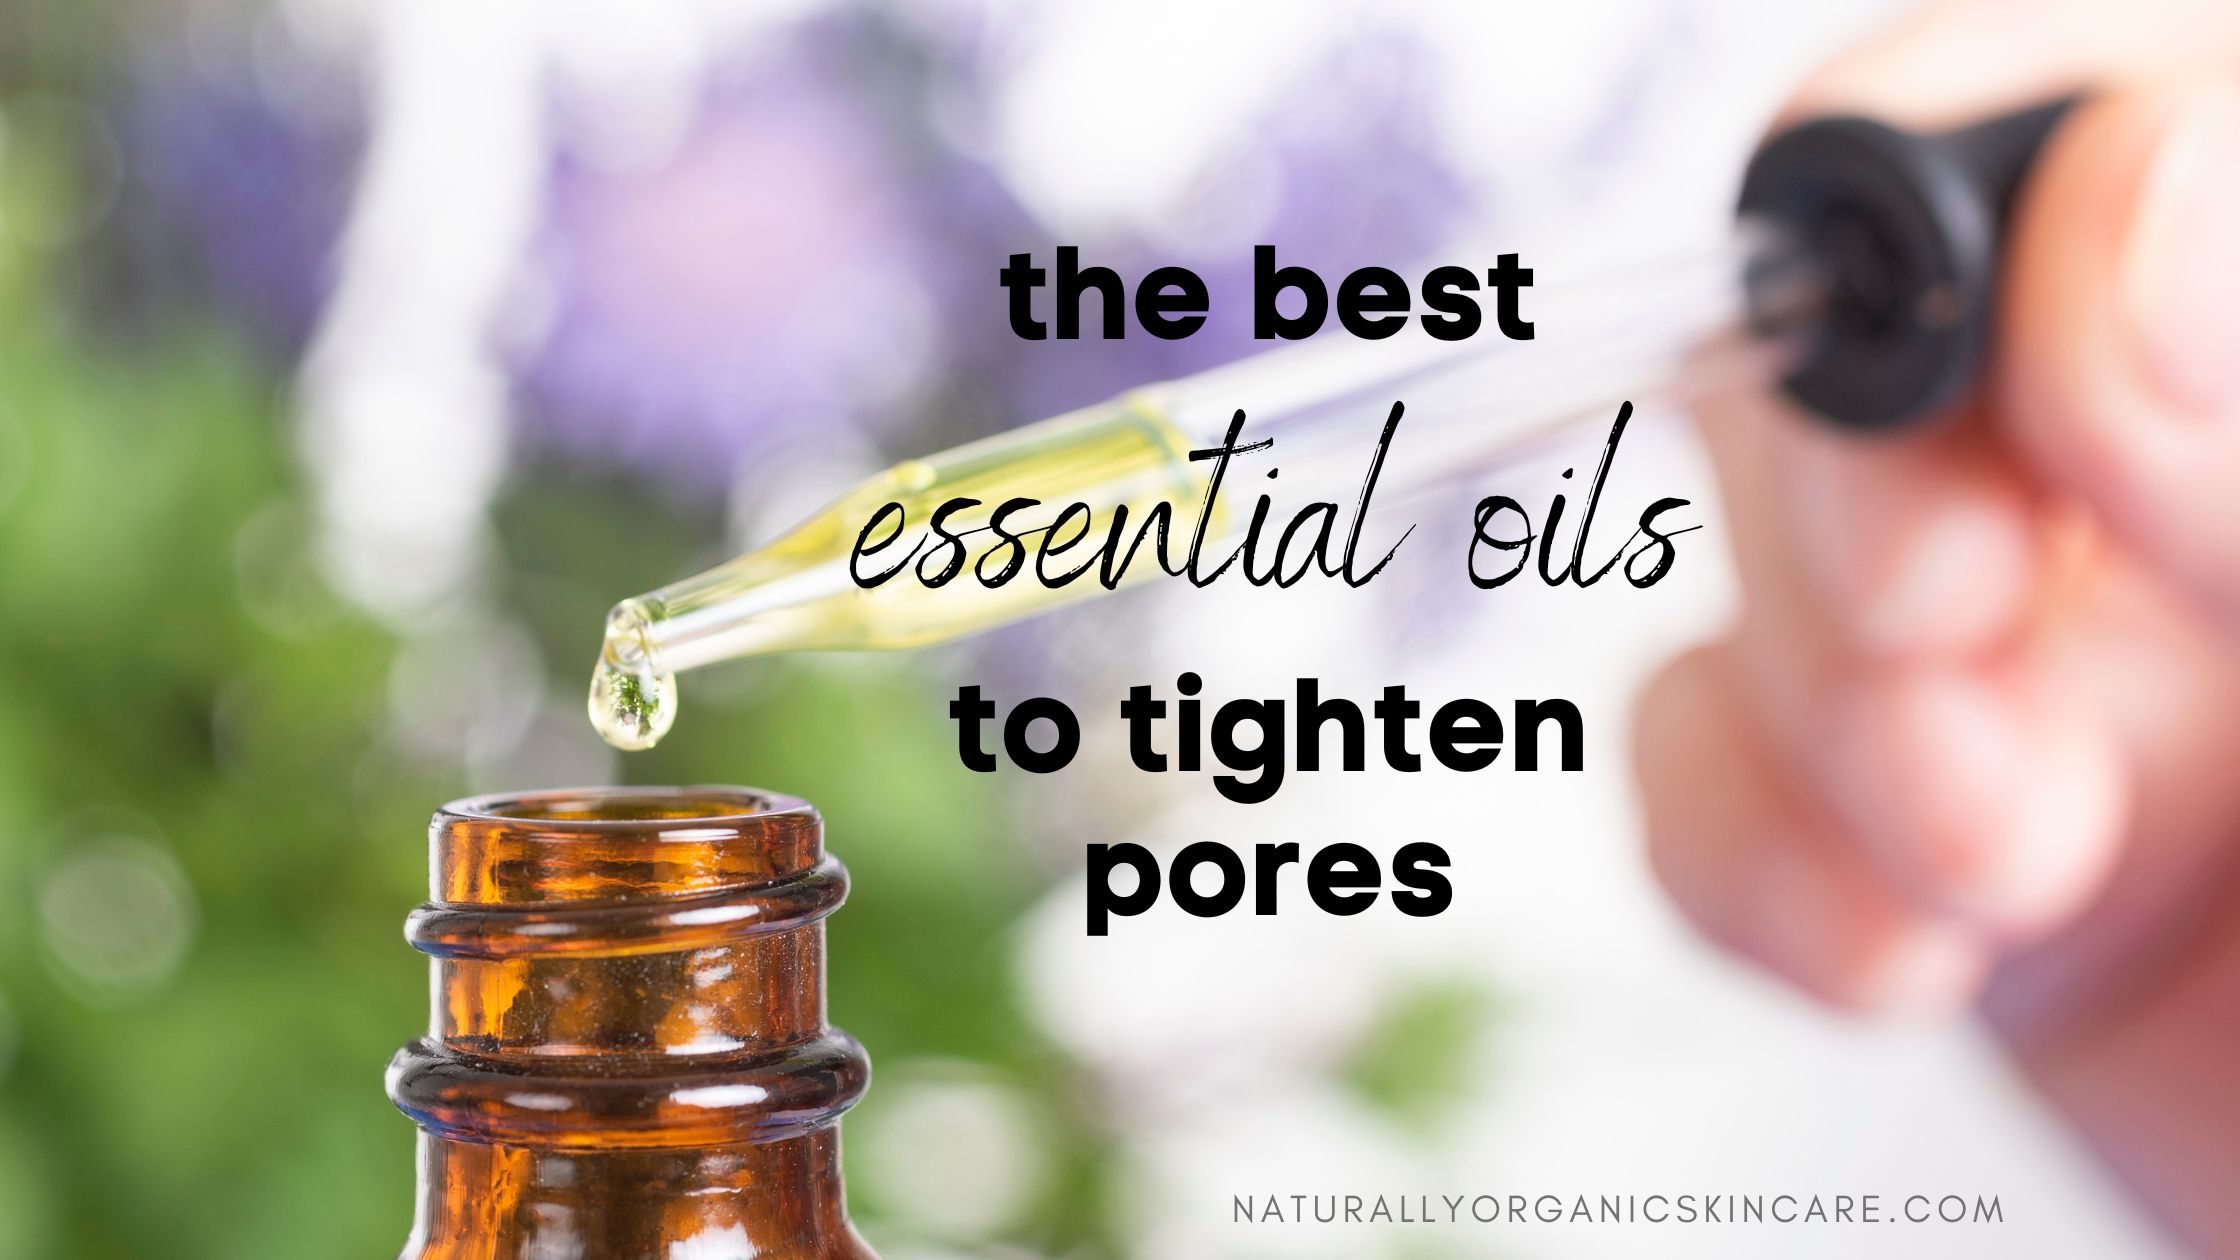 Are Essential Oils Bad for Skin? Is it Safe to Put Them on Your Face?